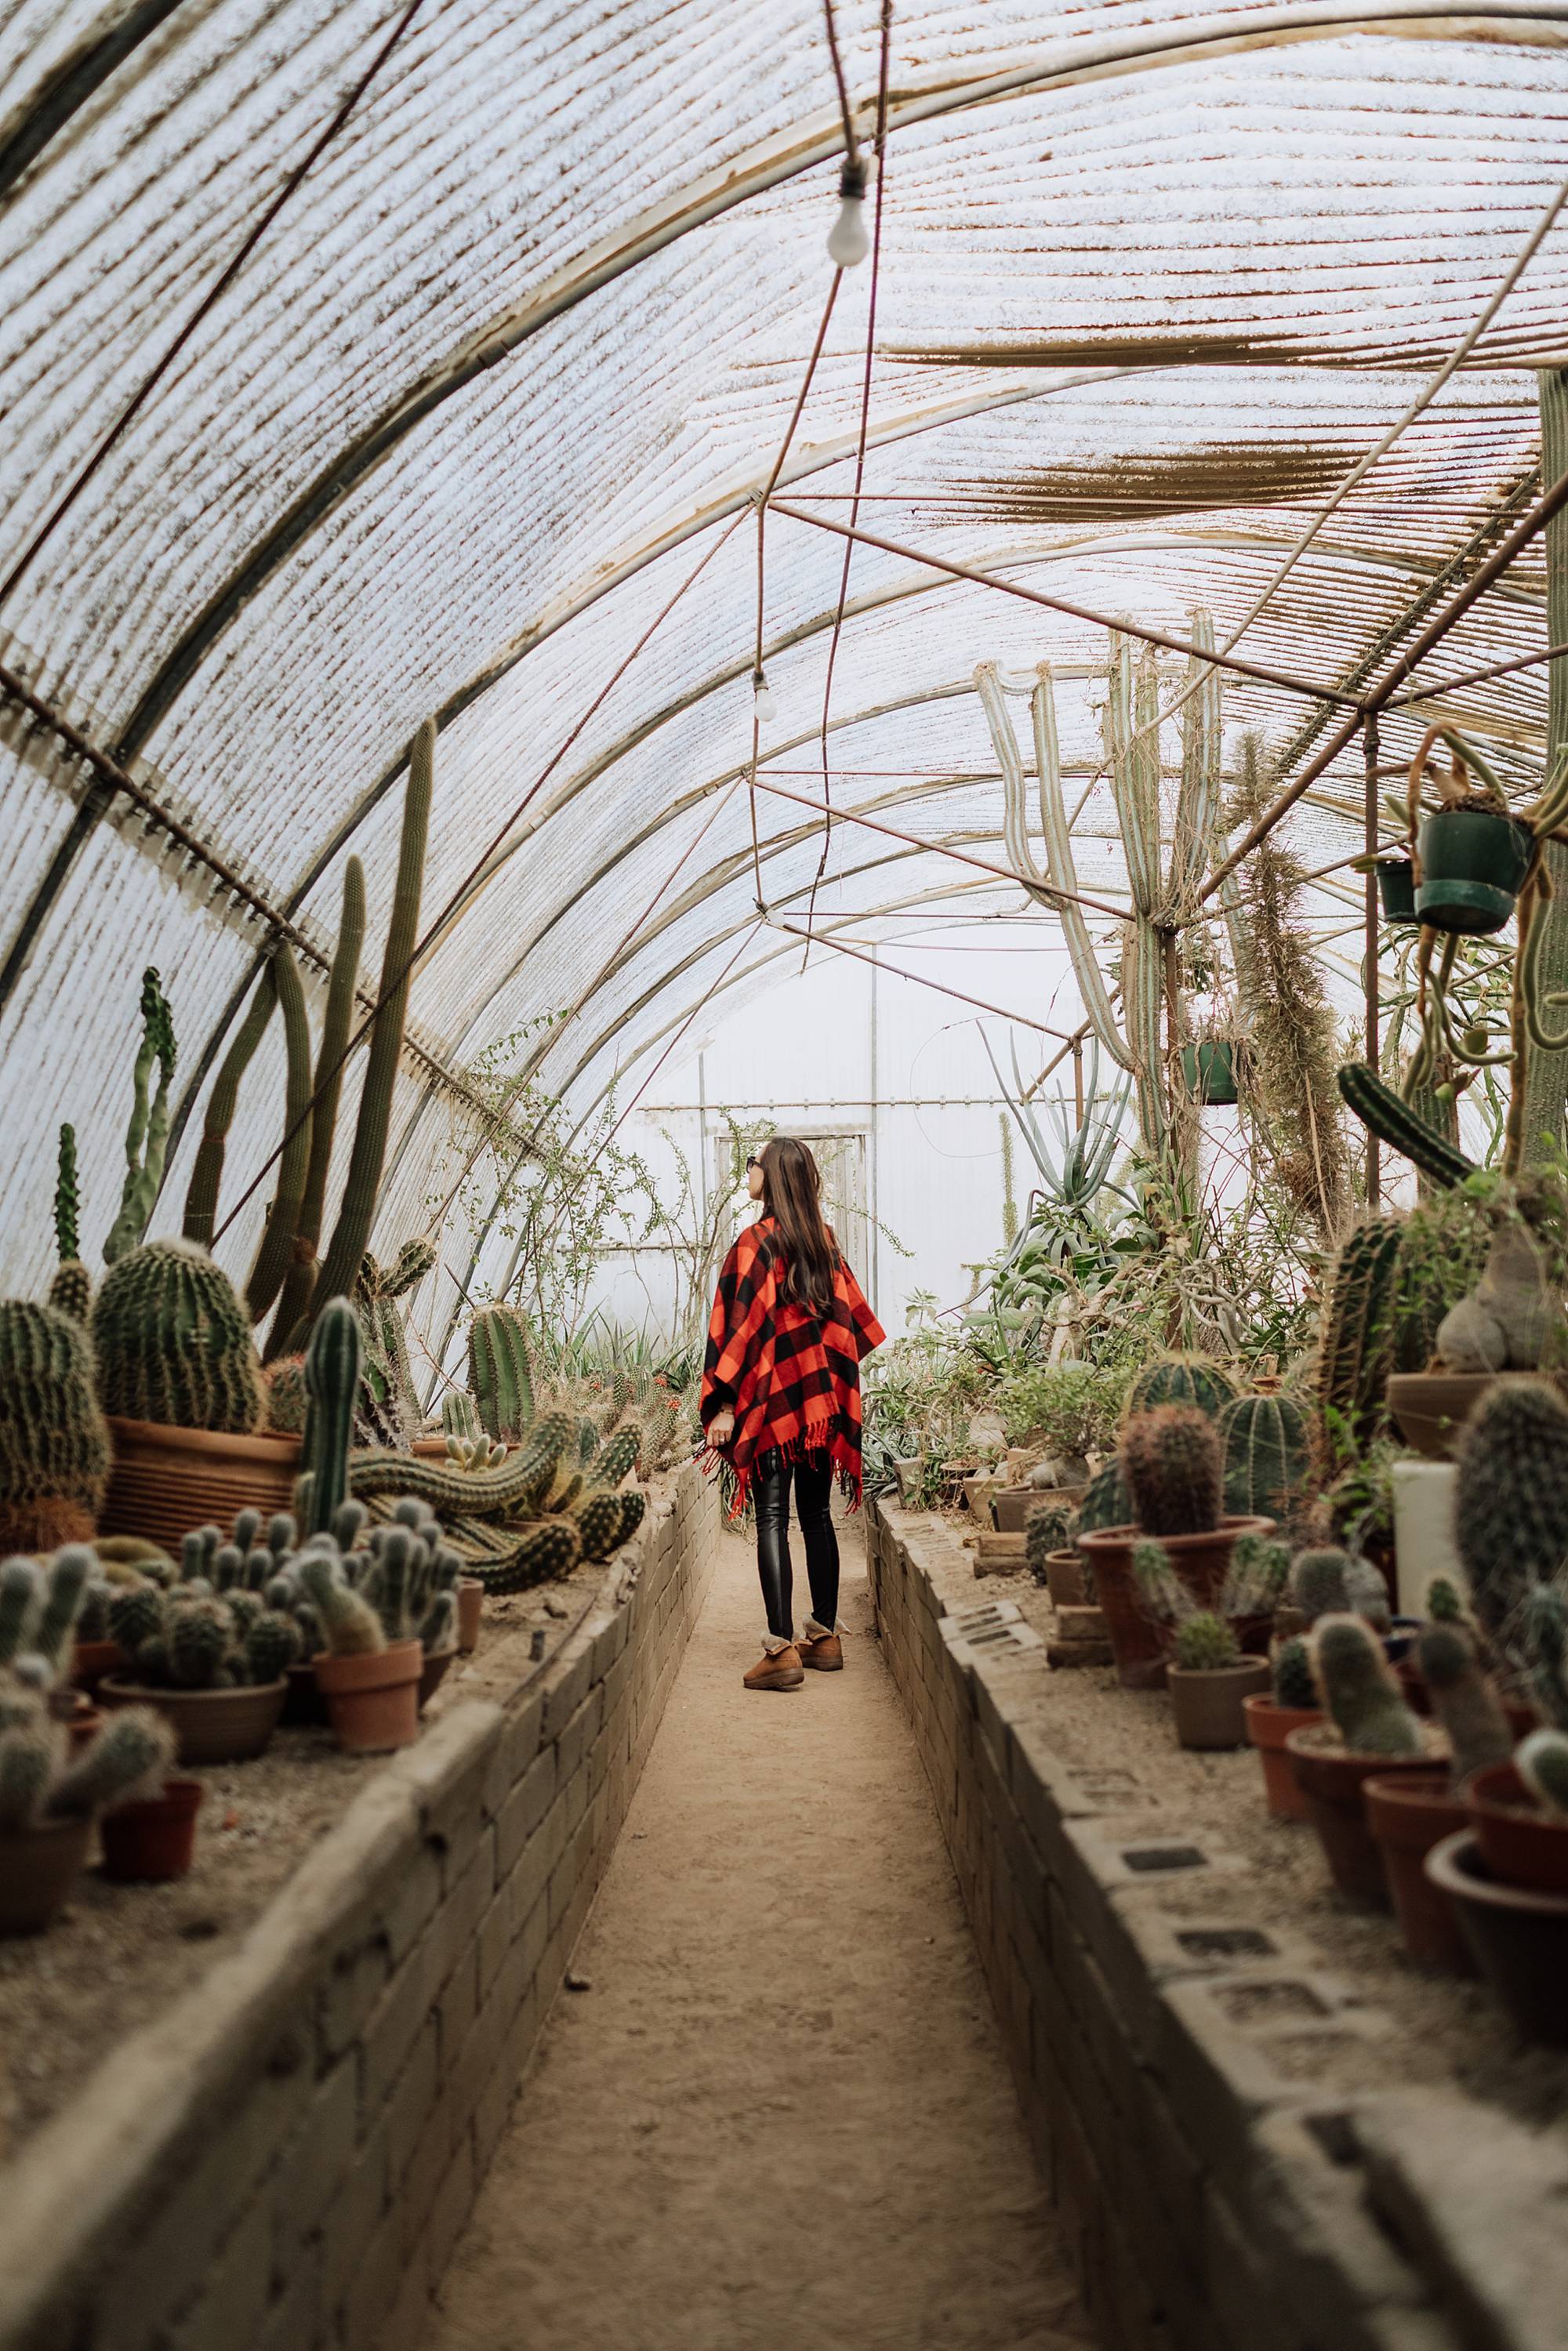 Moorten Botanical Garden Palm Springs cactus garden outdoor buffalo check poncho Abercrombie on phoenix travel and lifestyle blogger Diana Elizabeth wearing cozy shearling boots by FitFlop #cactusgarden #palmsprings #greenhouse